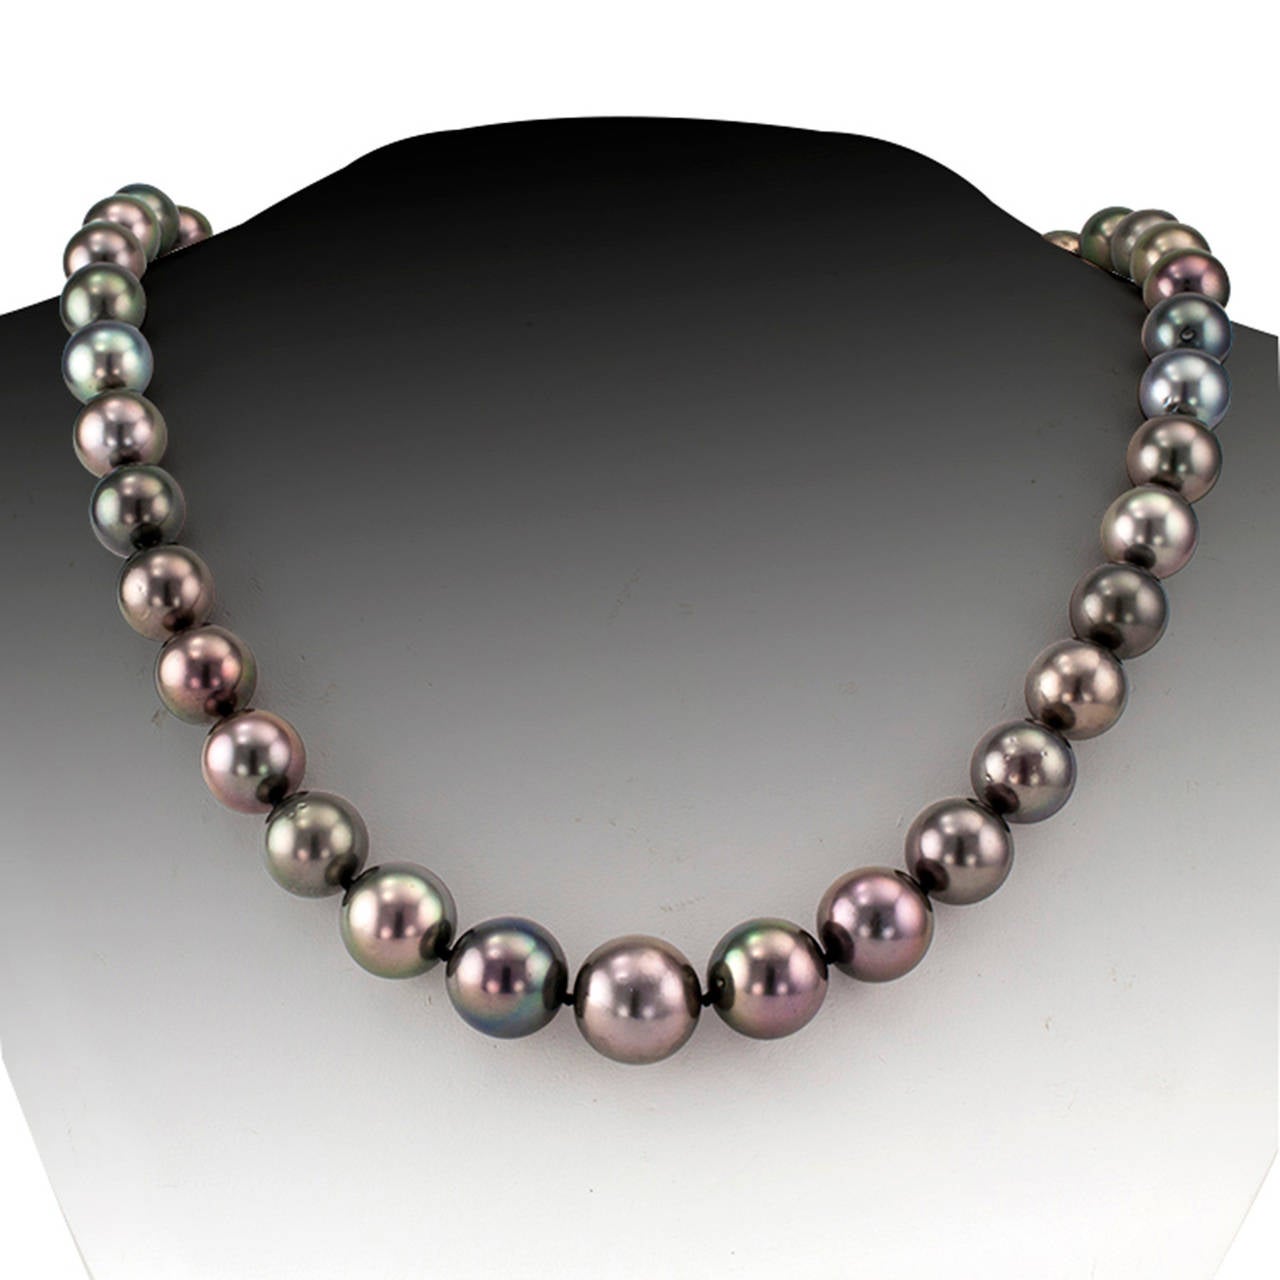 Black Tahitian Cultured Pearl Necklace

Comprising of 39 black Tahitian cultured pearls measuring from 10.0 to 13.84 mm terminating in a 14 karat gold spherical clasp pave-set with diamonds totaling approximately 2.00 carats, approximately 19